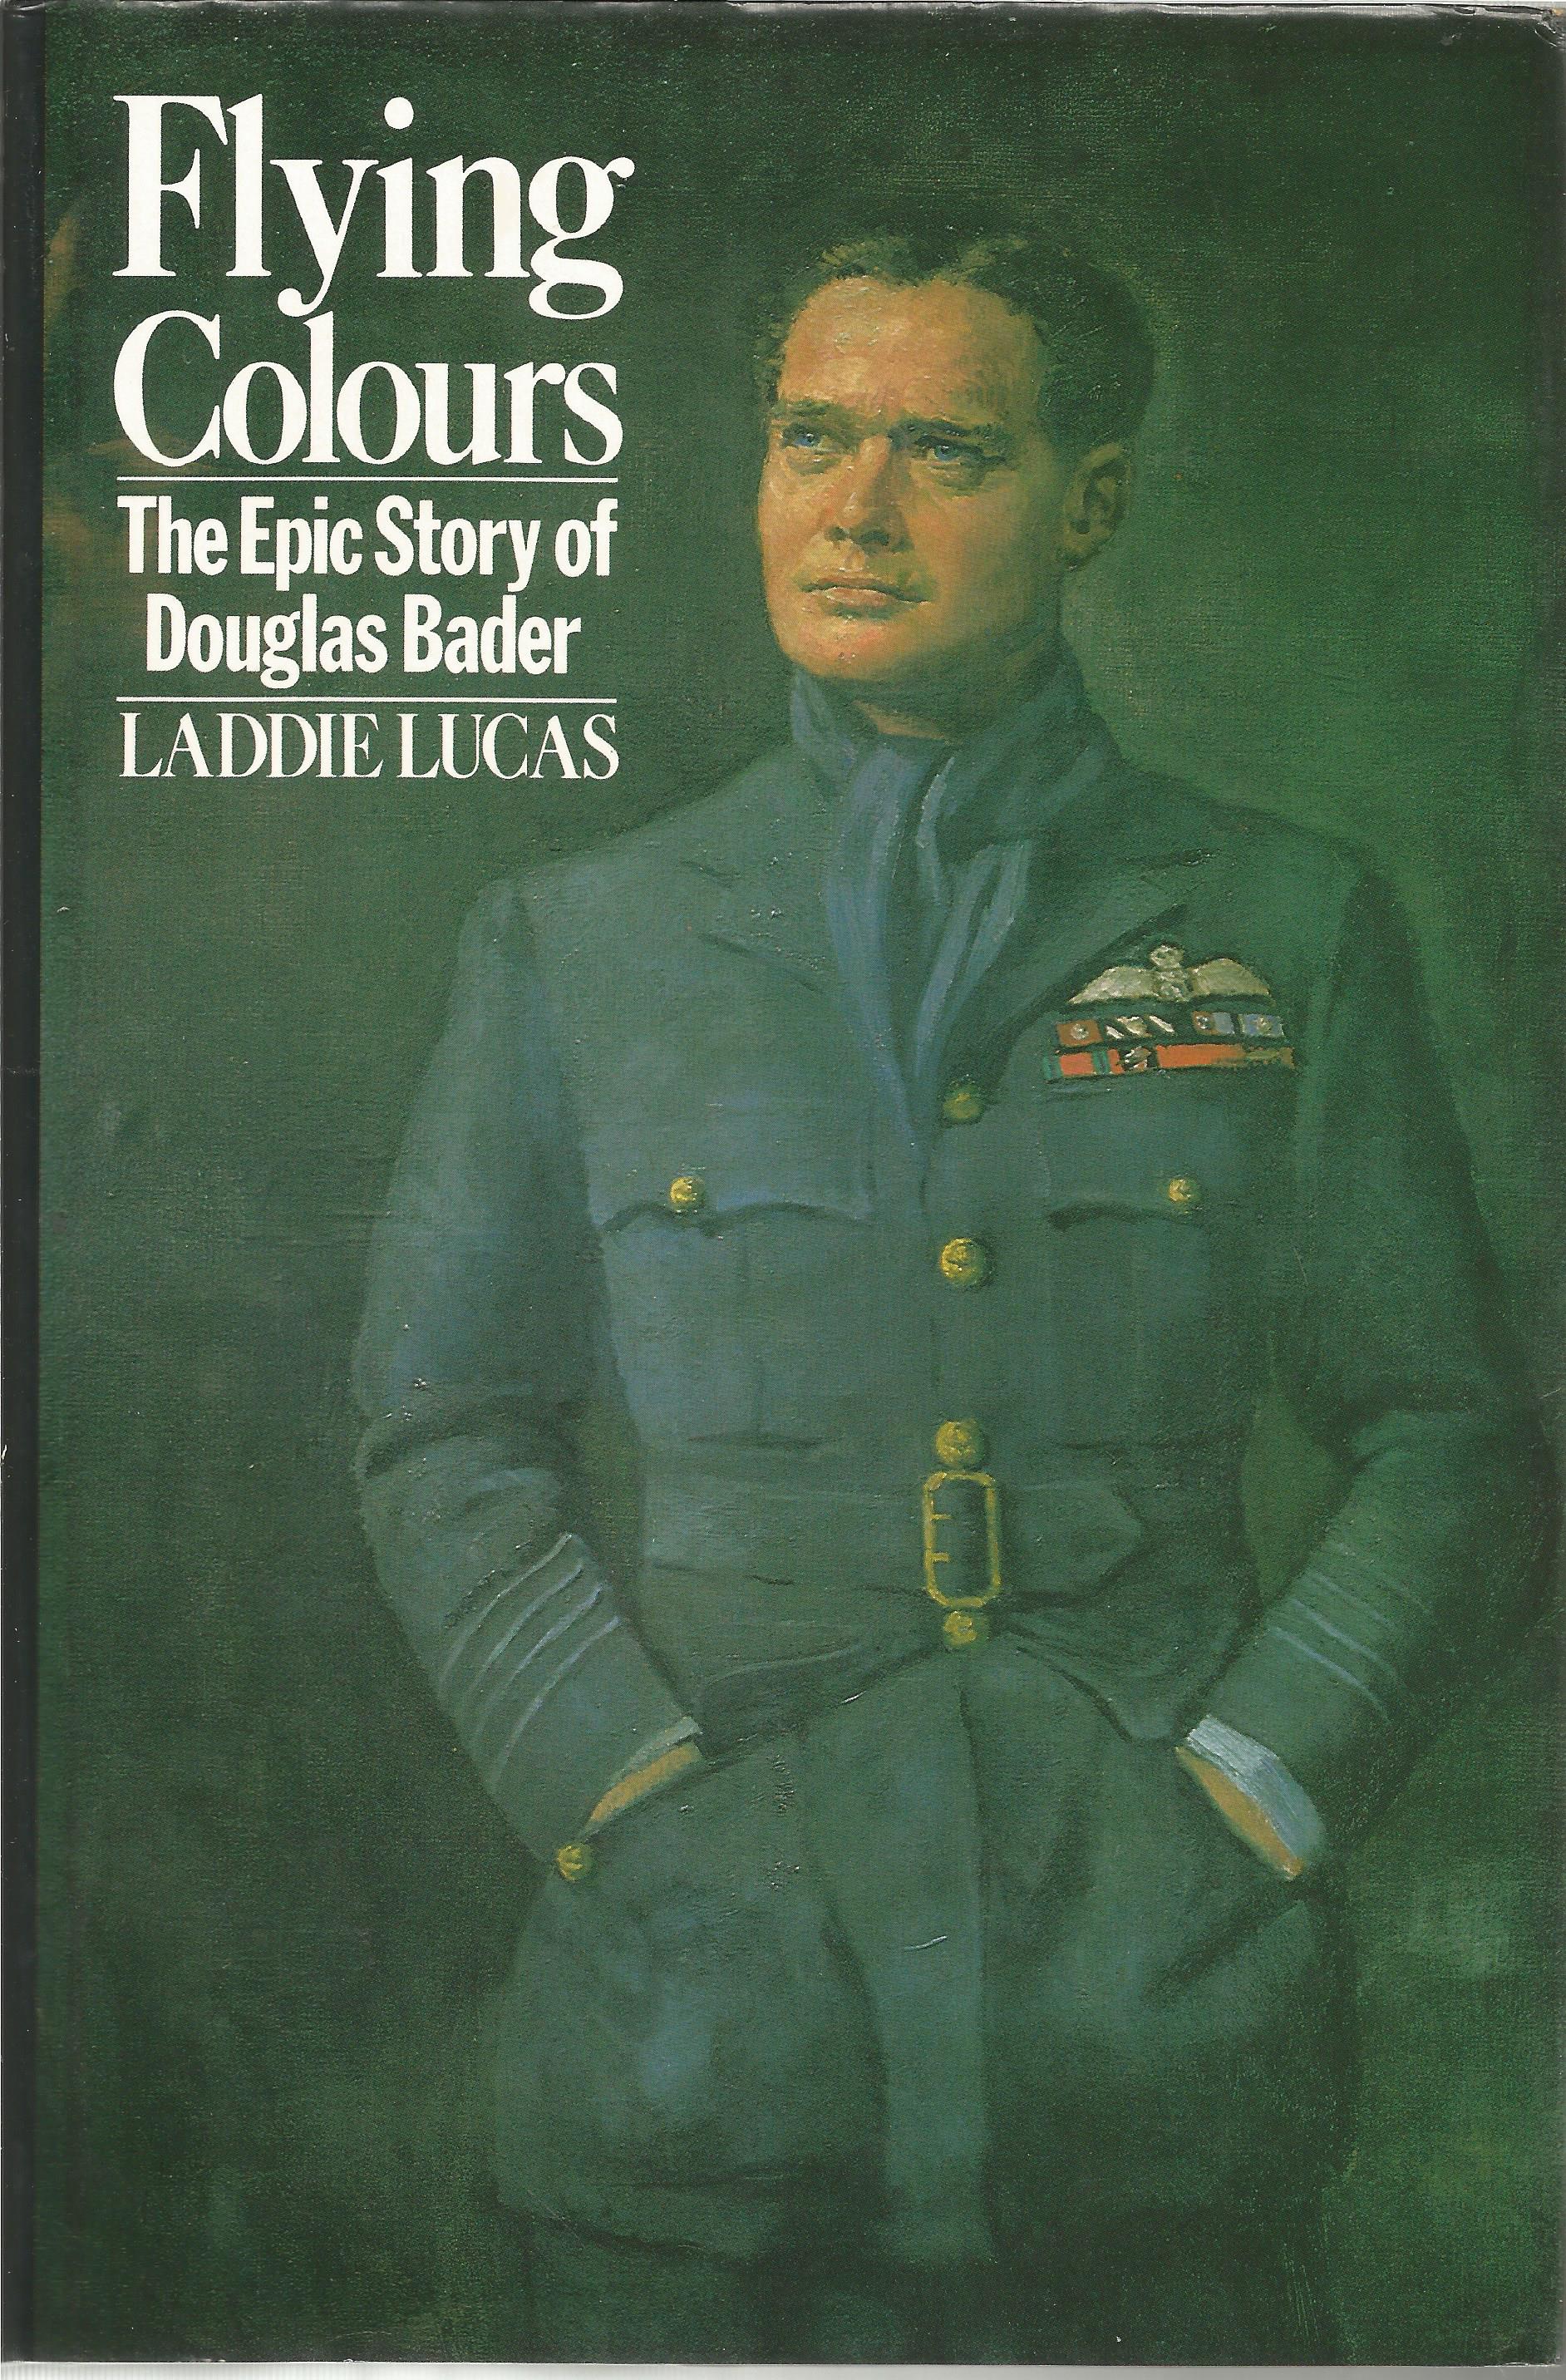 World War Two hardback book Flying Colours The Epic Story of Douglas Bader signed inside by - Image 2 of 3